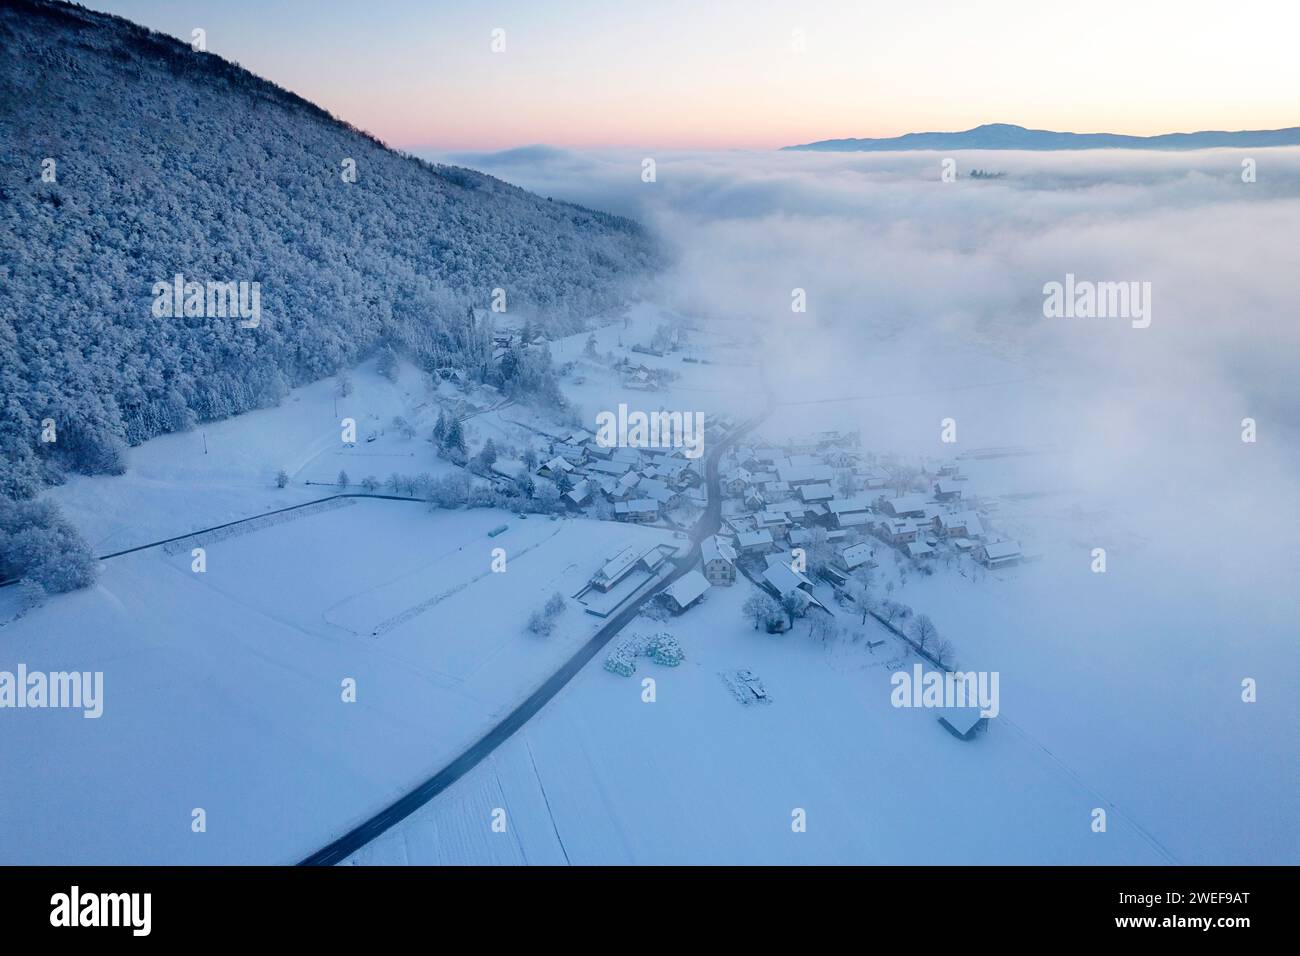 Early morning aerial view towards small village near Dolenjske toplice after heavy snowfall, morning fog still above the valley, Slovenia Stock Photo